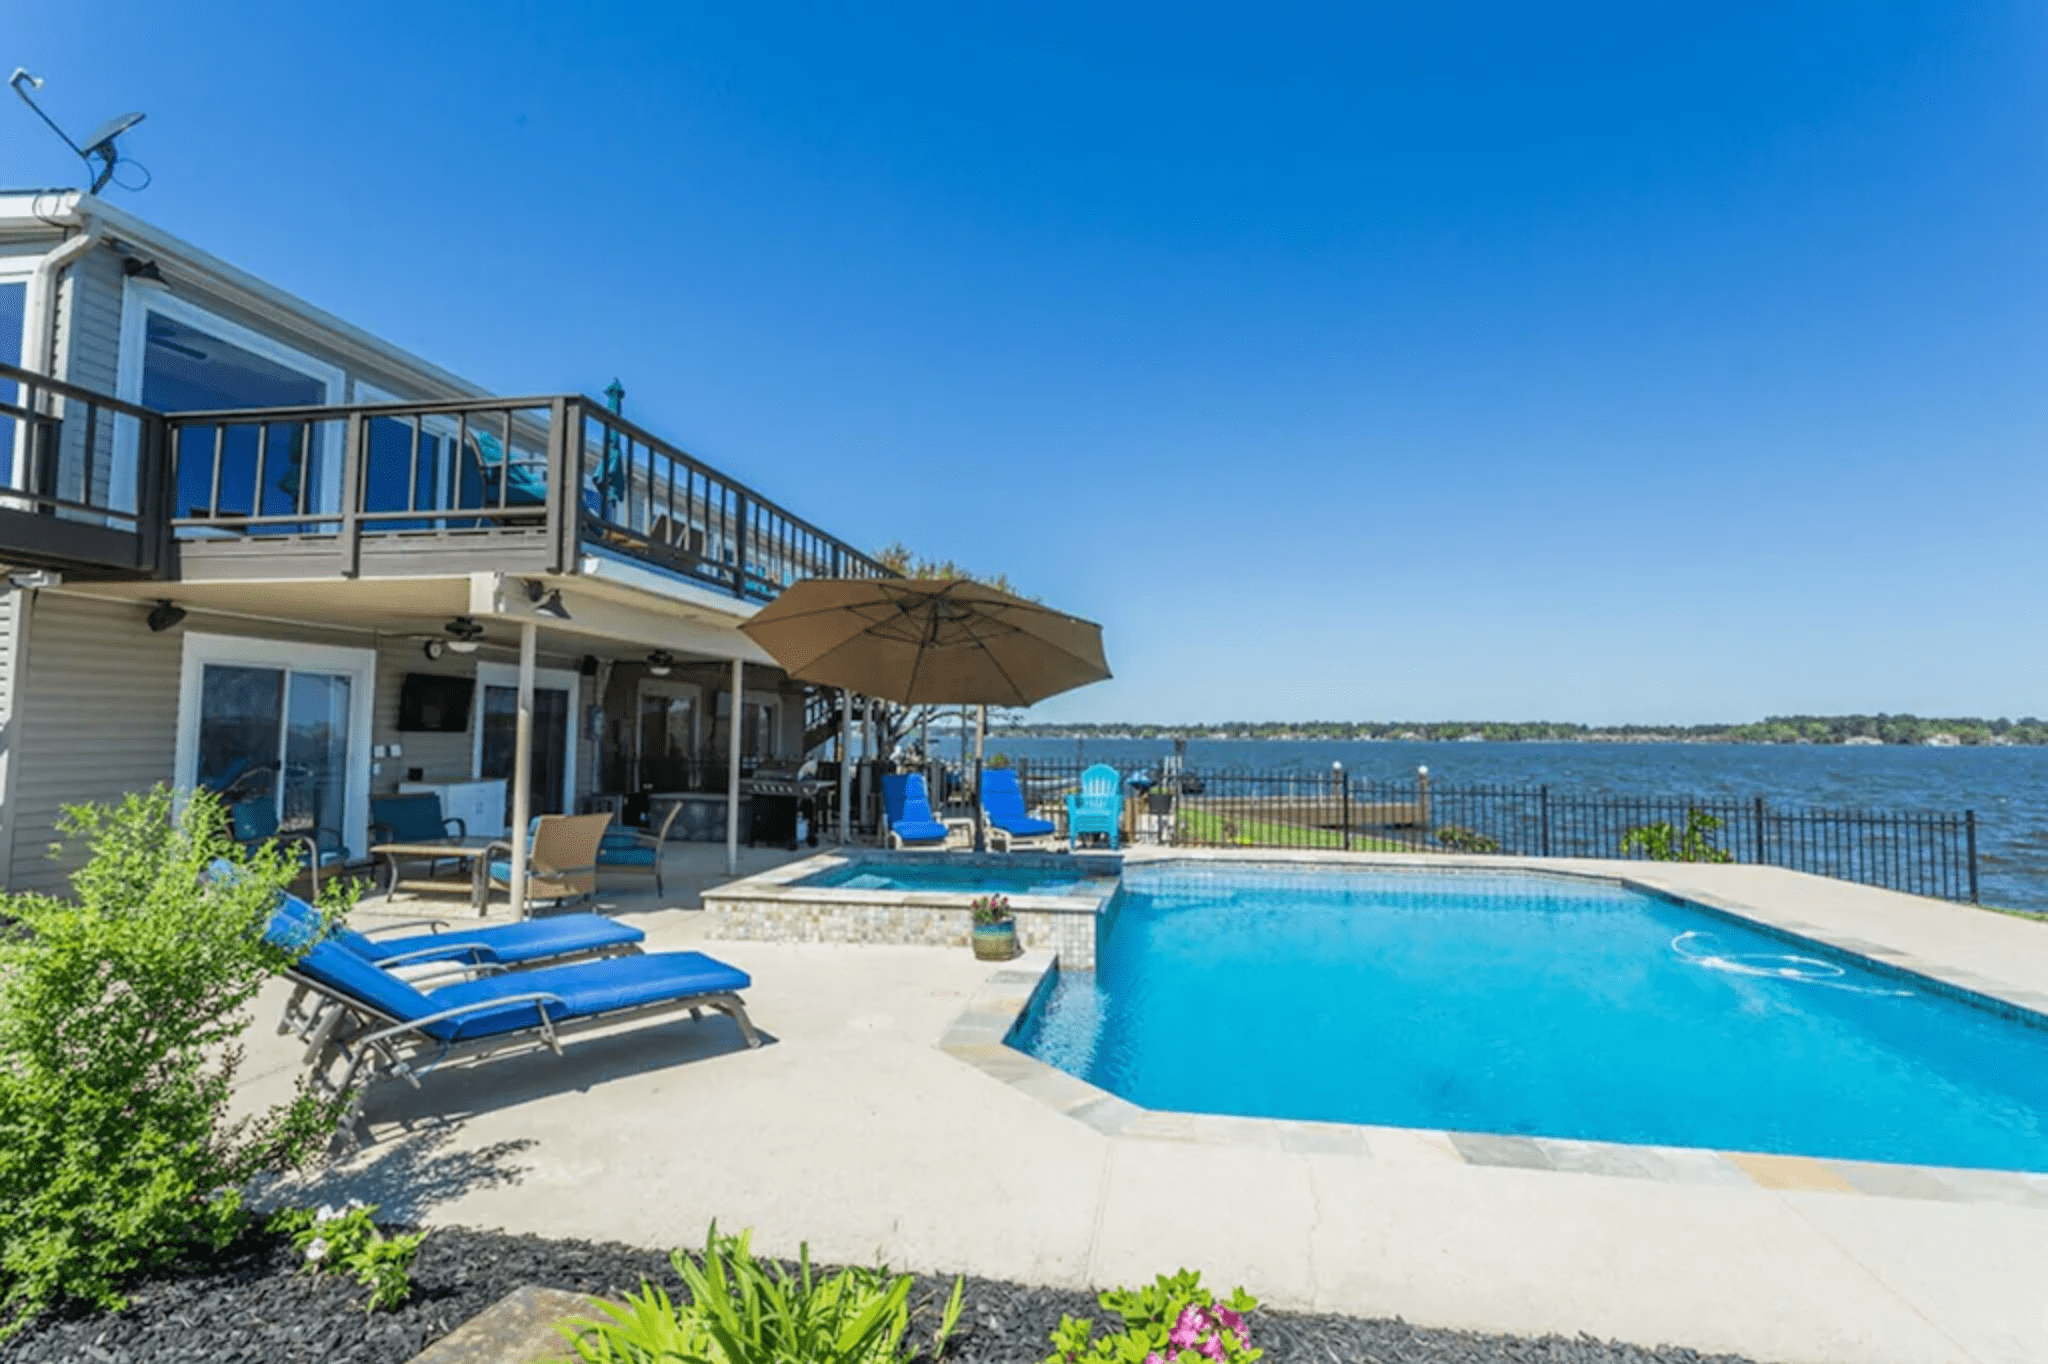 <p class="listicle-page__cta-button-shop"><a class="shop-btn" href="https://www.vrbo.com/1059632?">Book Now</a></p> <p>One of the most popular swimming destinations in Texas, Lake Travis is a magnet for anyone daydreaming about floating on crystal-clear waters under bluebird skies. The lake is fed by two springs and is framed by an abundance of cypress and oak trees, and this gorgeous waterfront ranch is the ideal setting to enjoy the quiet lake life. There are several walking trails around the property, a fire pit by the water, and a cliff for launching yourself into the lake on a hot Texas summer day.</p>